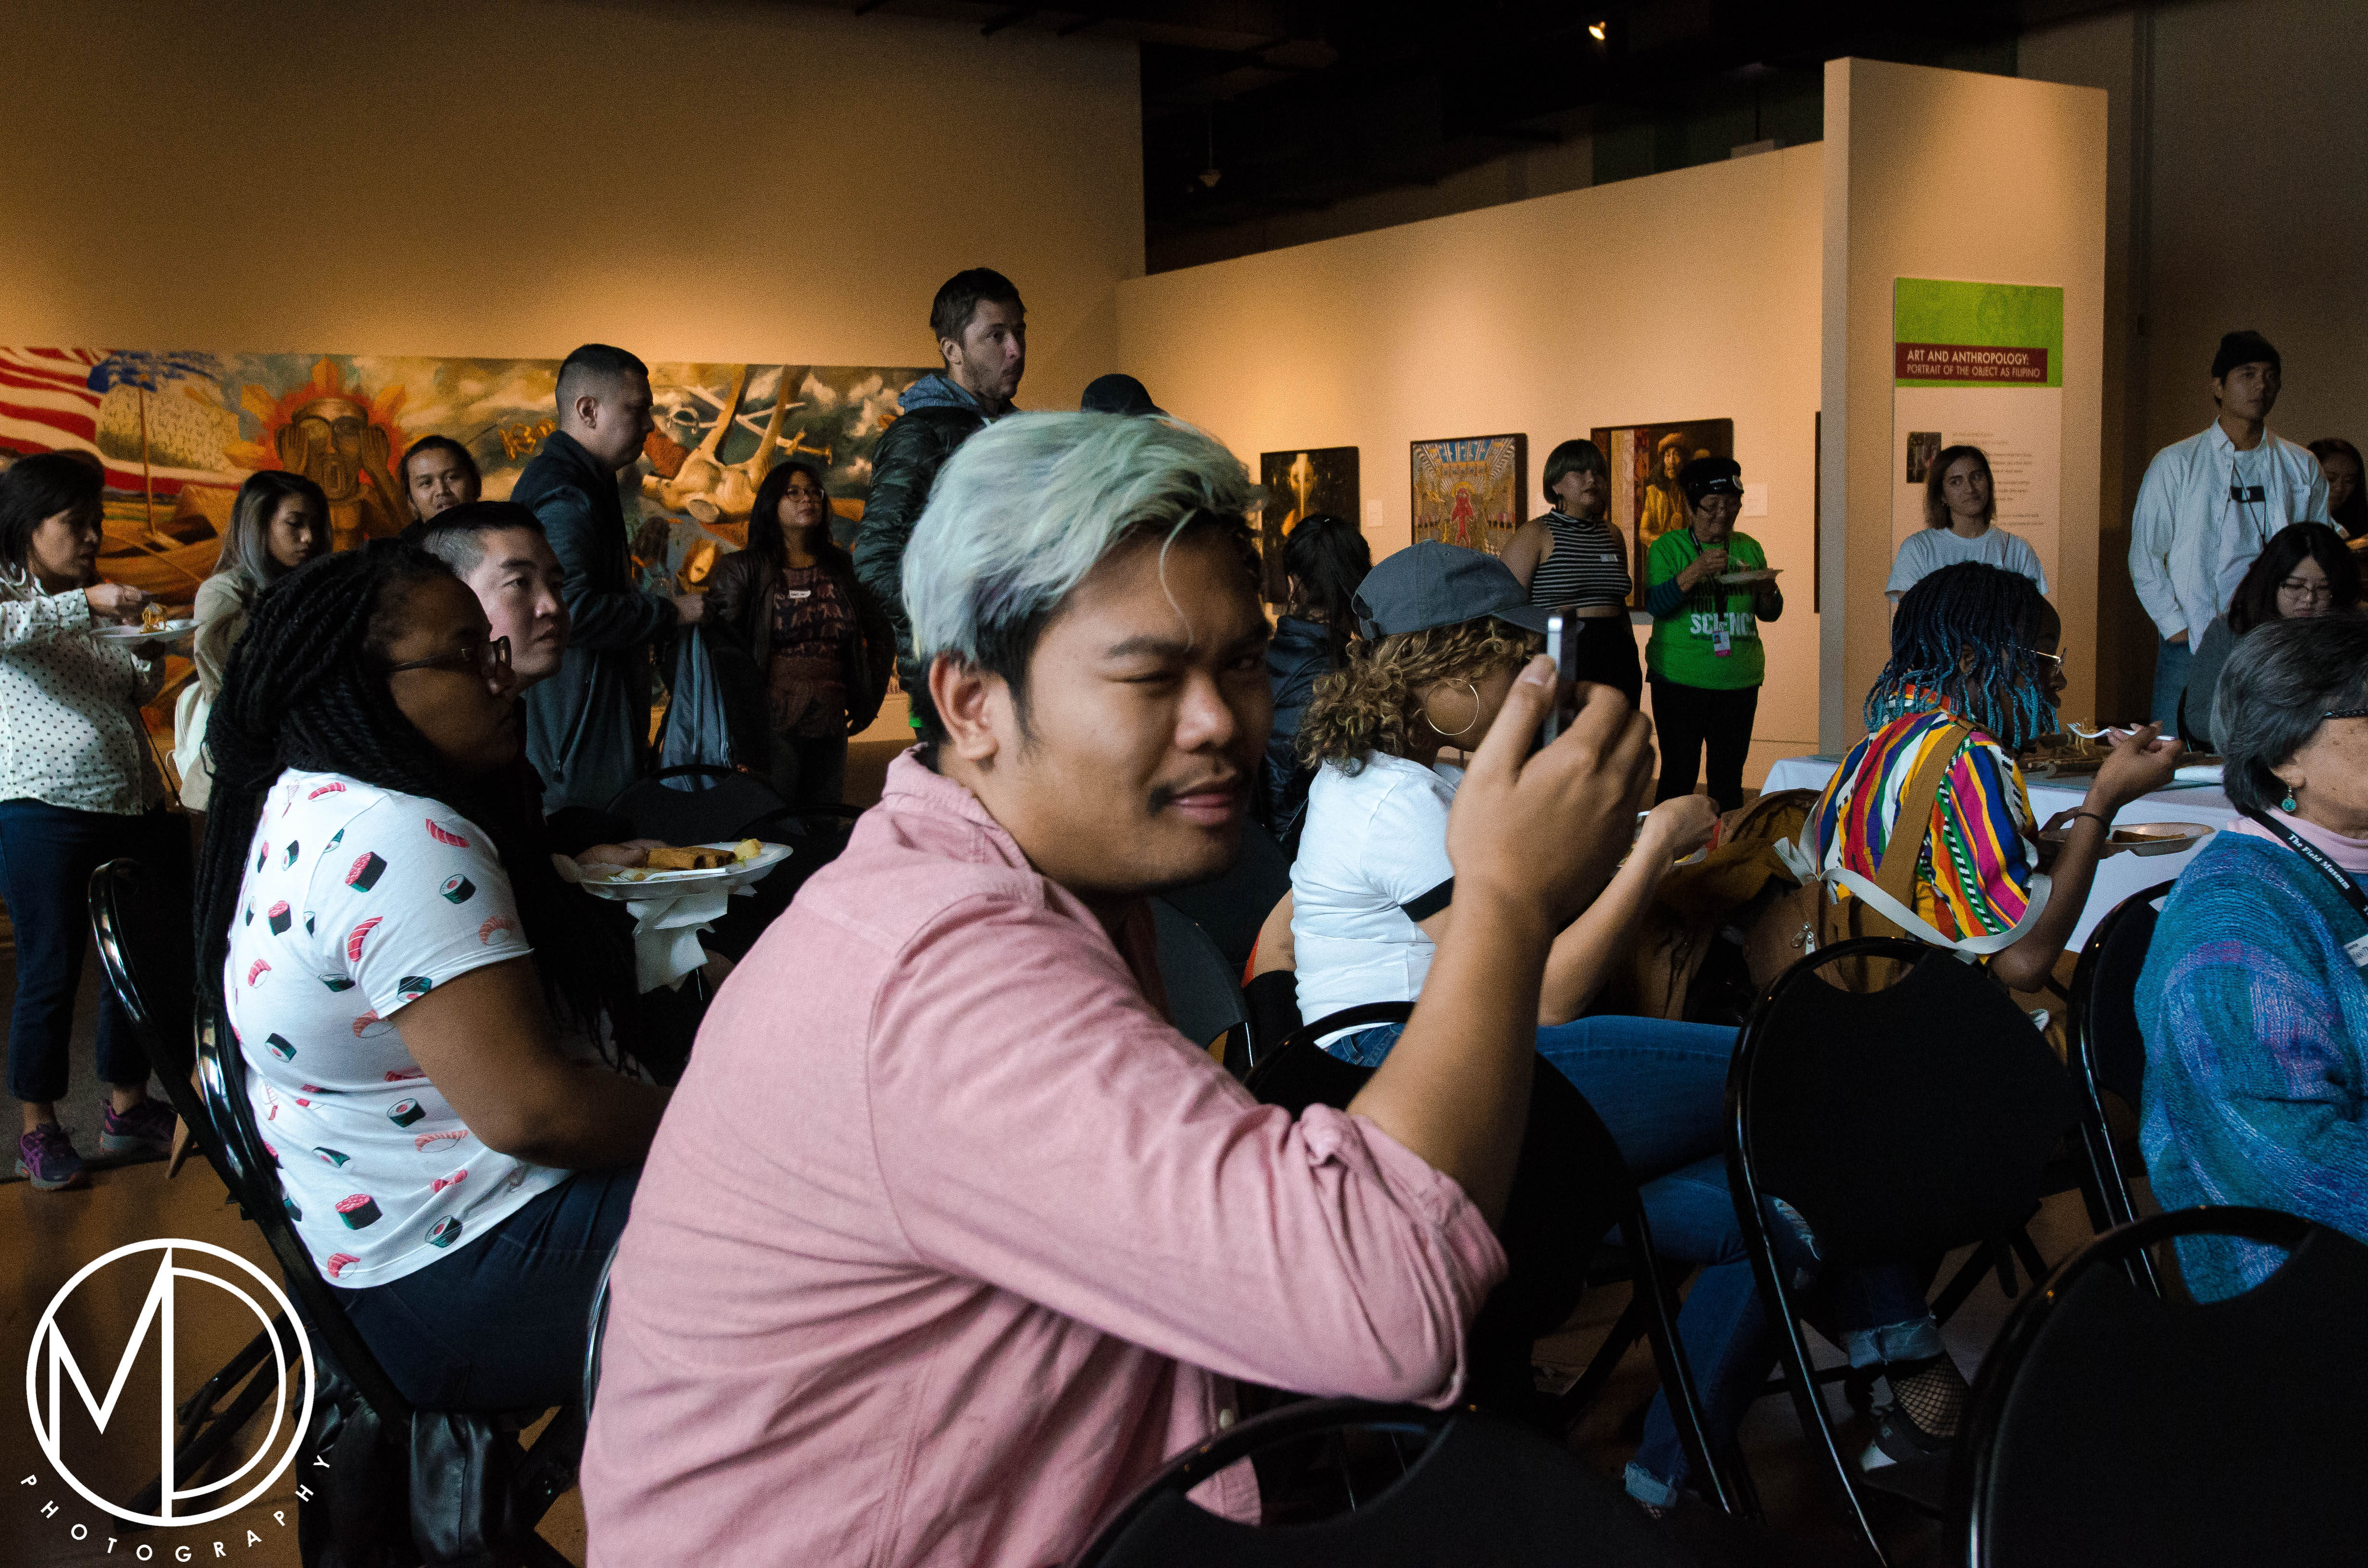 Jerico Domingo recording the presentation. (c) Field Museum of Natural History - CC BY-NC 4.0